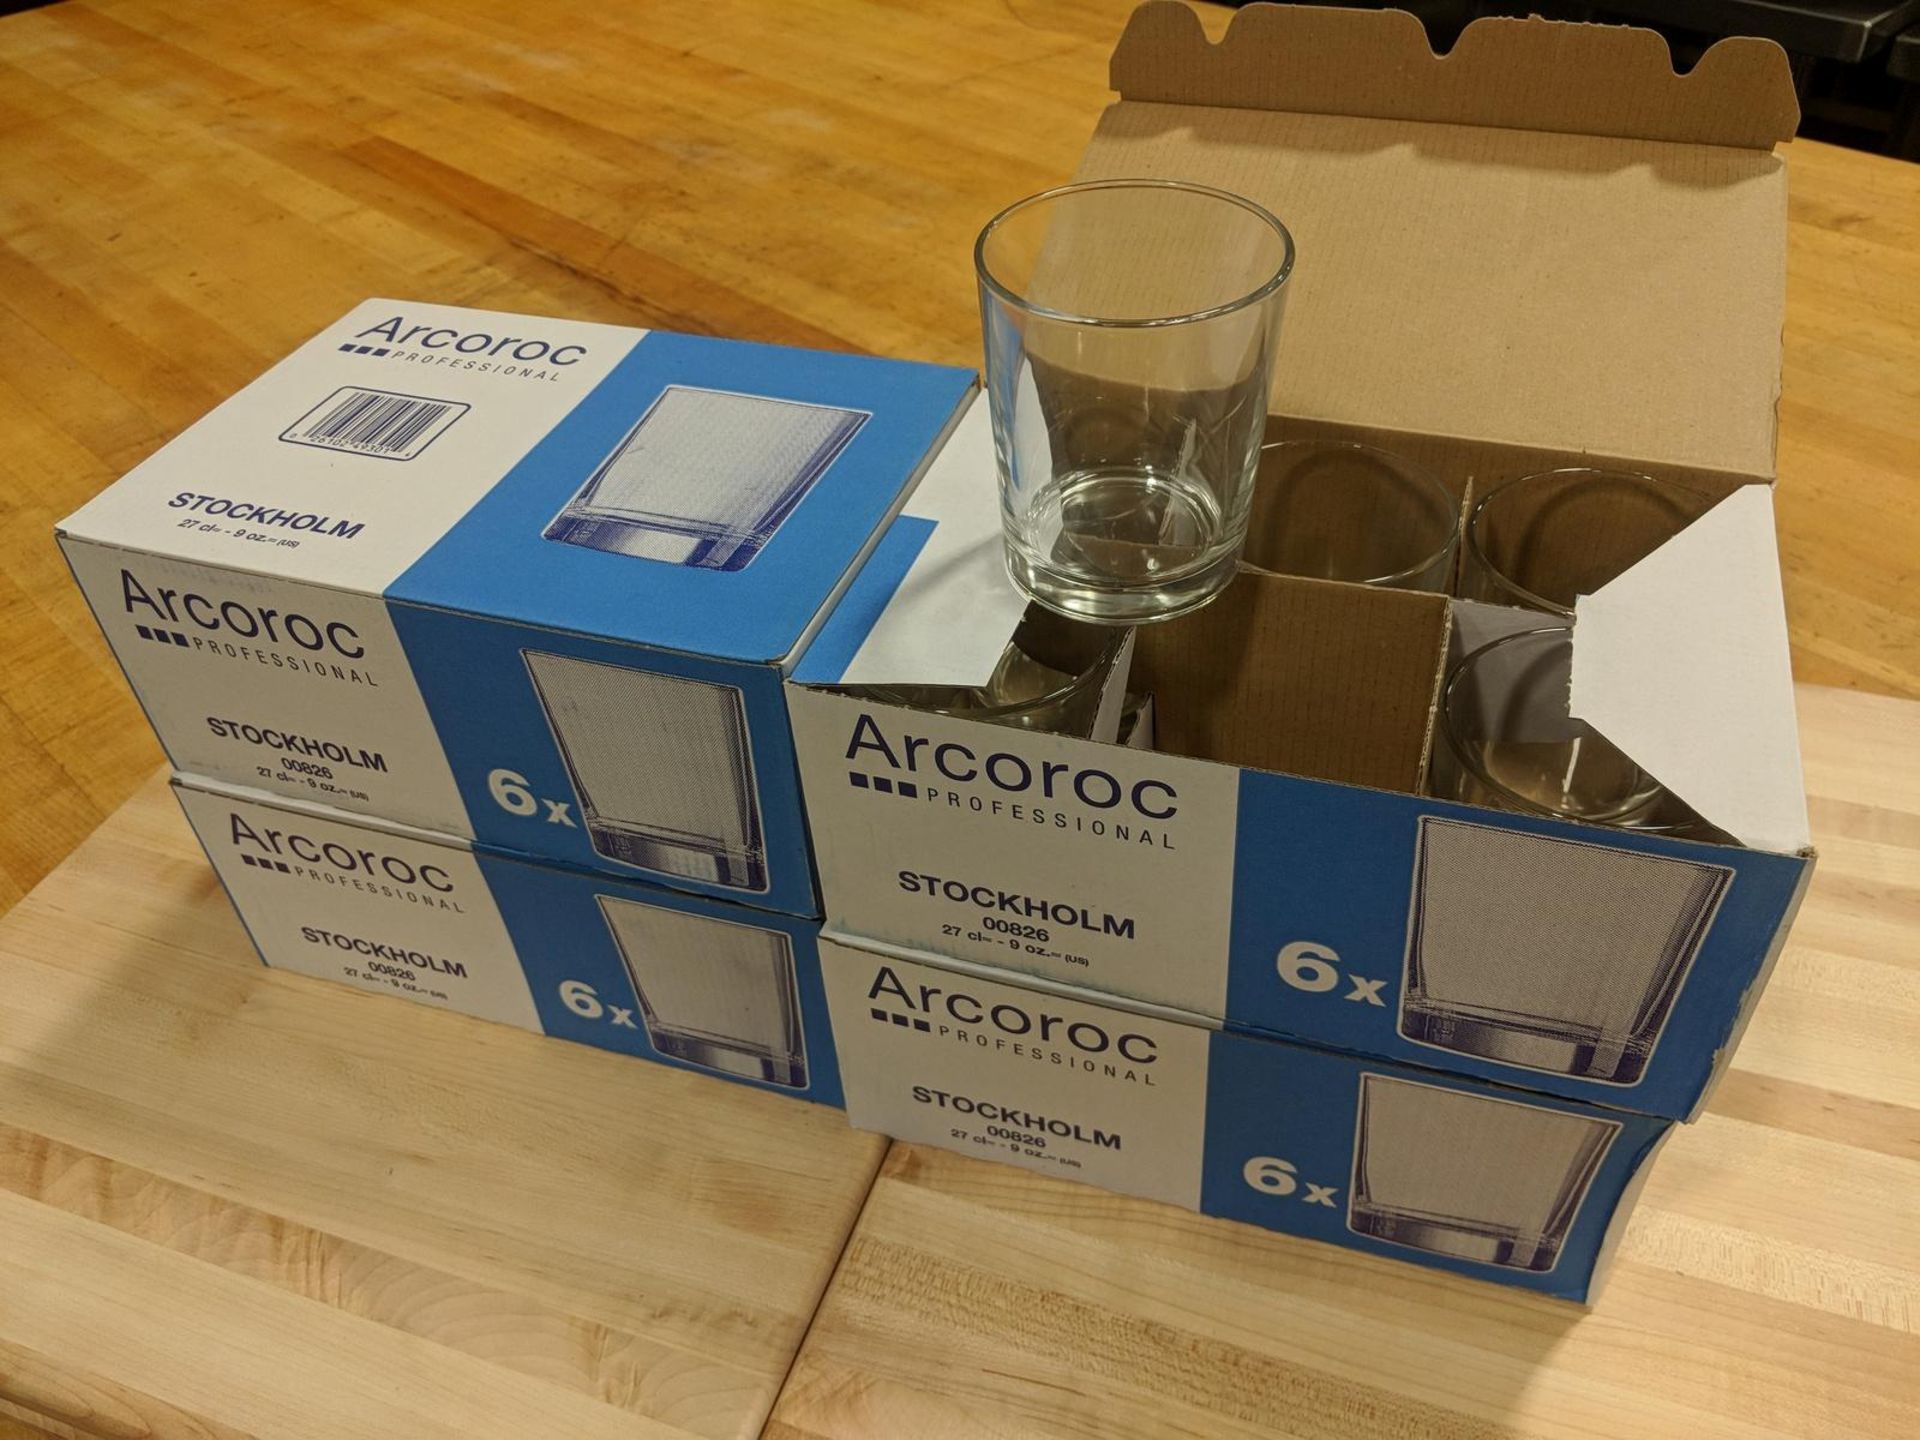 9.5oz/270ml Stockholm Old Fashioned Glasses - Lot of 24 (4 Boxes), Arcoroc 00826